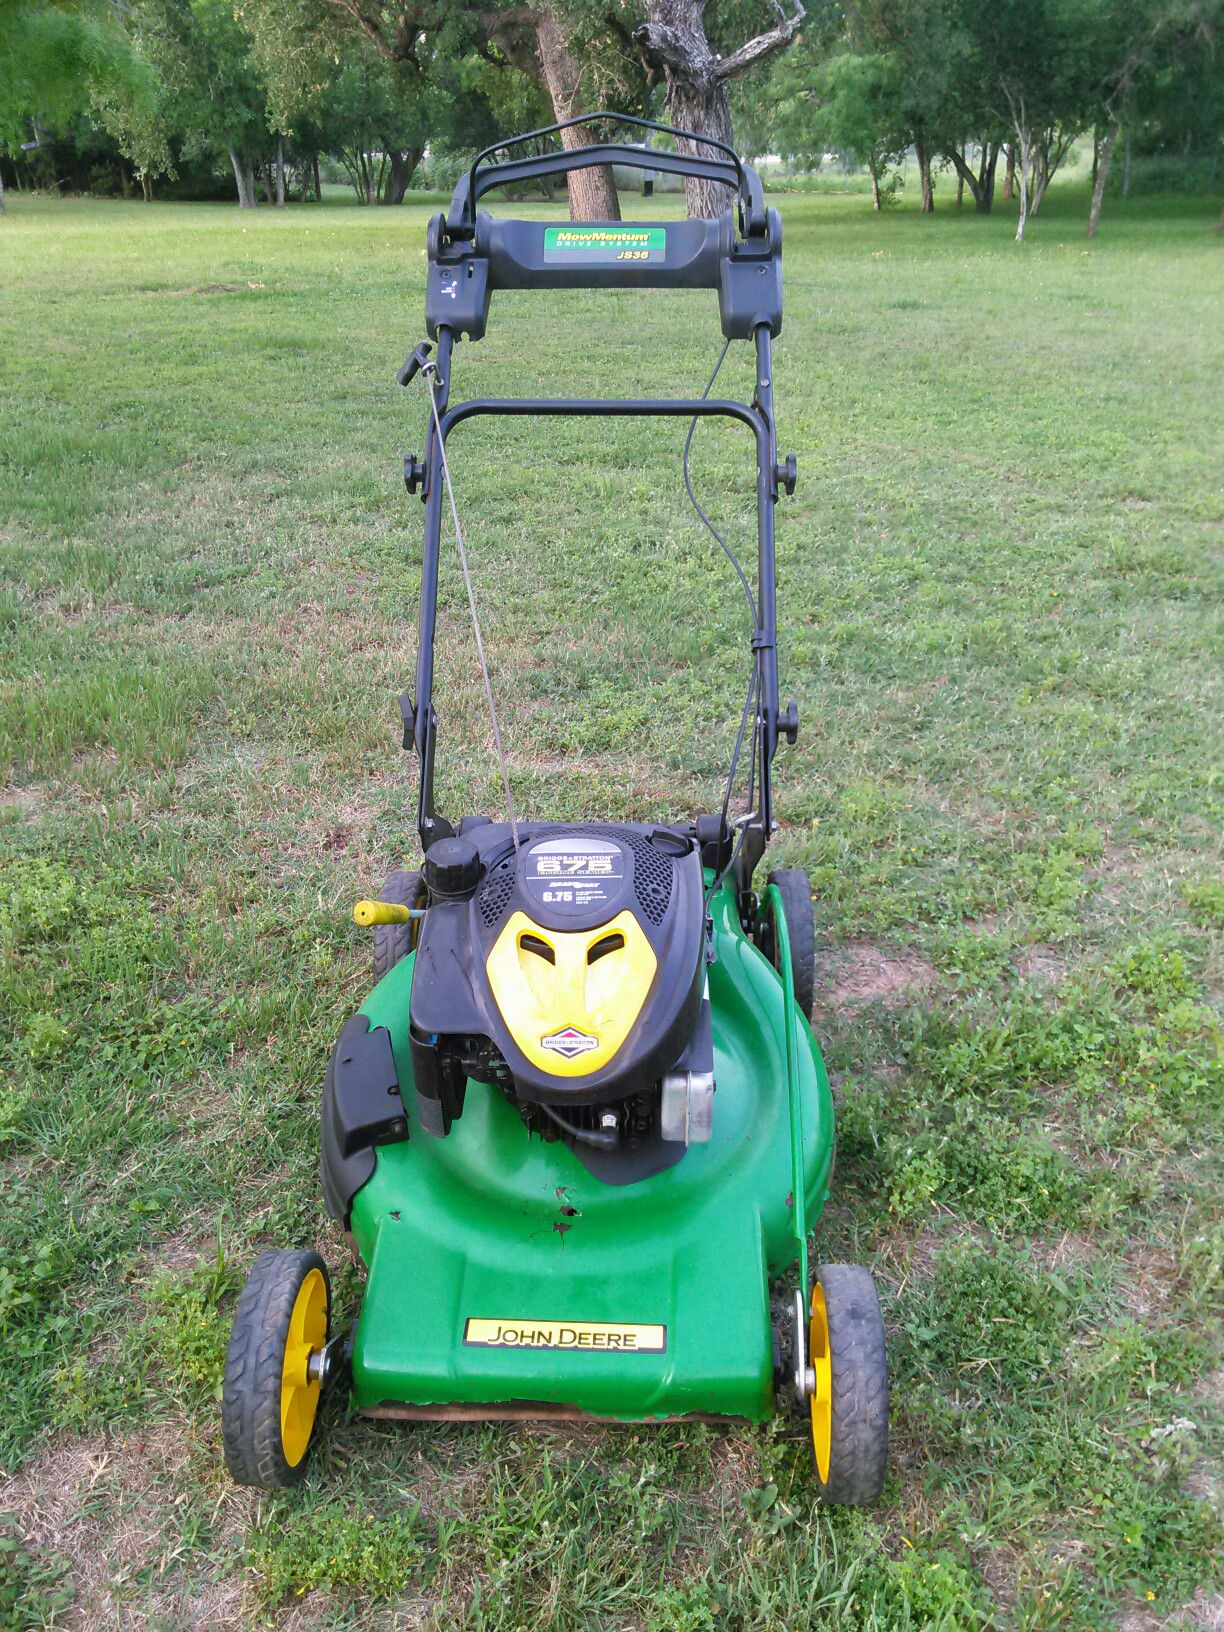 John Deere 6.75 horsepower self-propelled lawn mower works absolutely great guaranteed to turn on on first pull